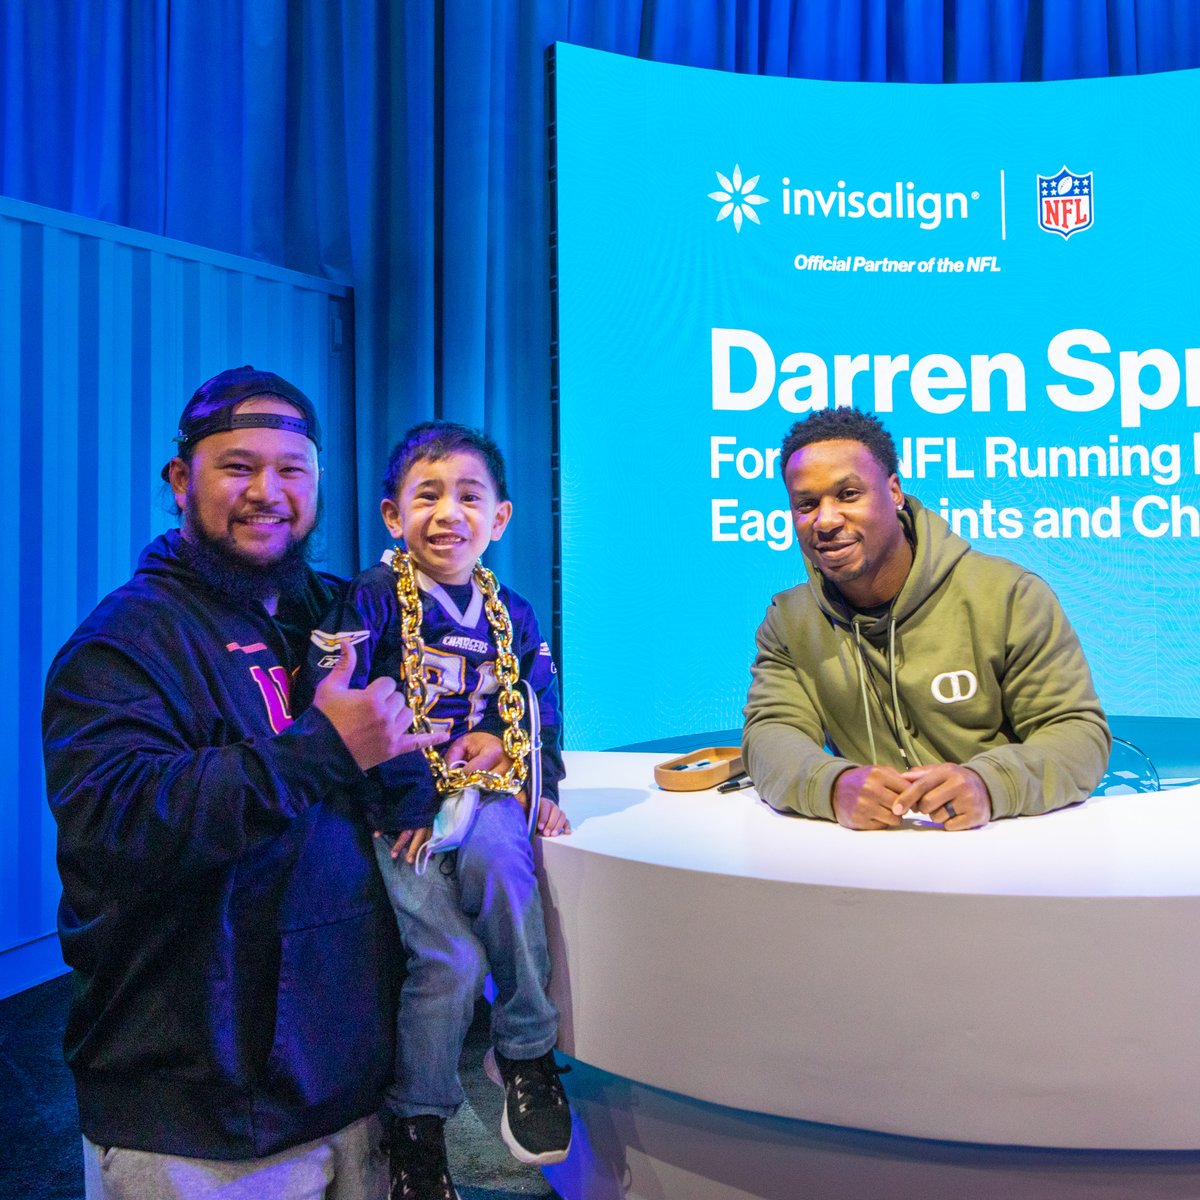 Wrapping up Weekend ☝️ of the #SuperBowlExperience with @DarrenSproles! 🏈 We love seeing your #winningsmiles when you get to meet some of your favorite NFL players! 😁 #NFL #Invisalign #InvisalignSmile #SBLVI #SuperBowl